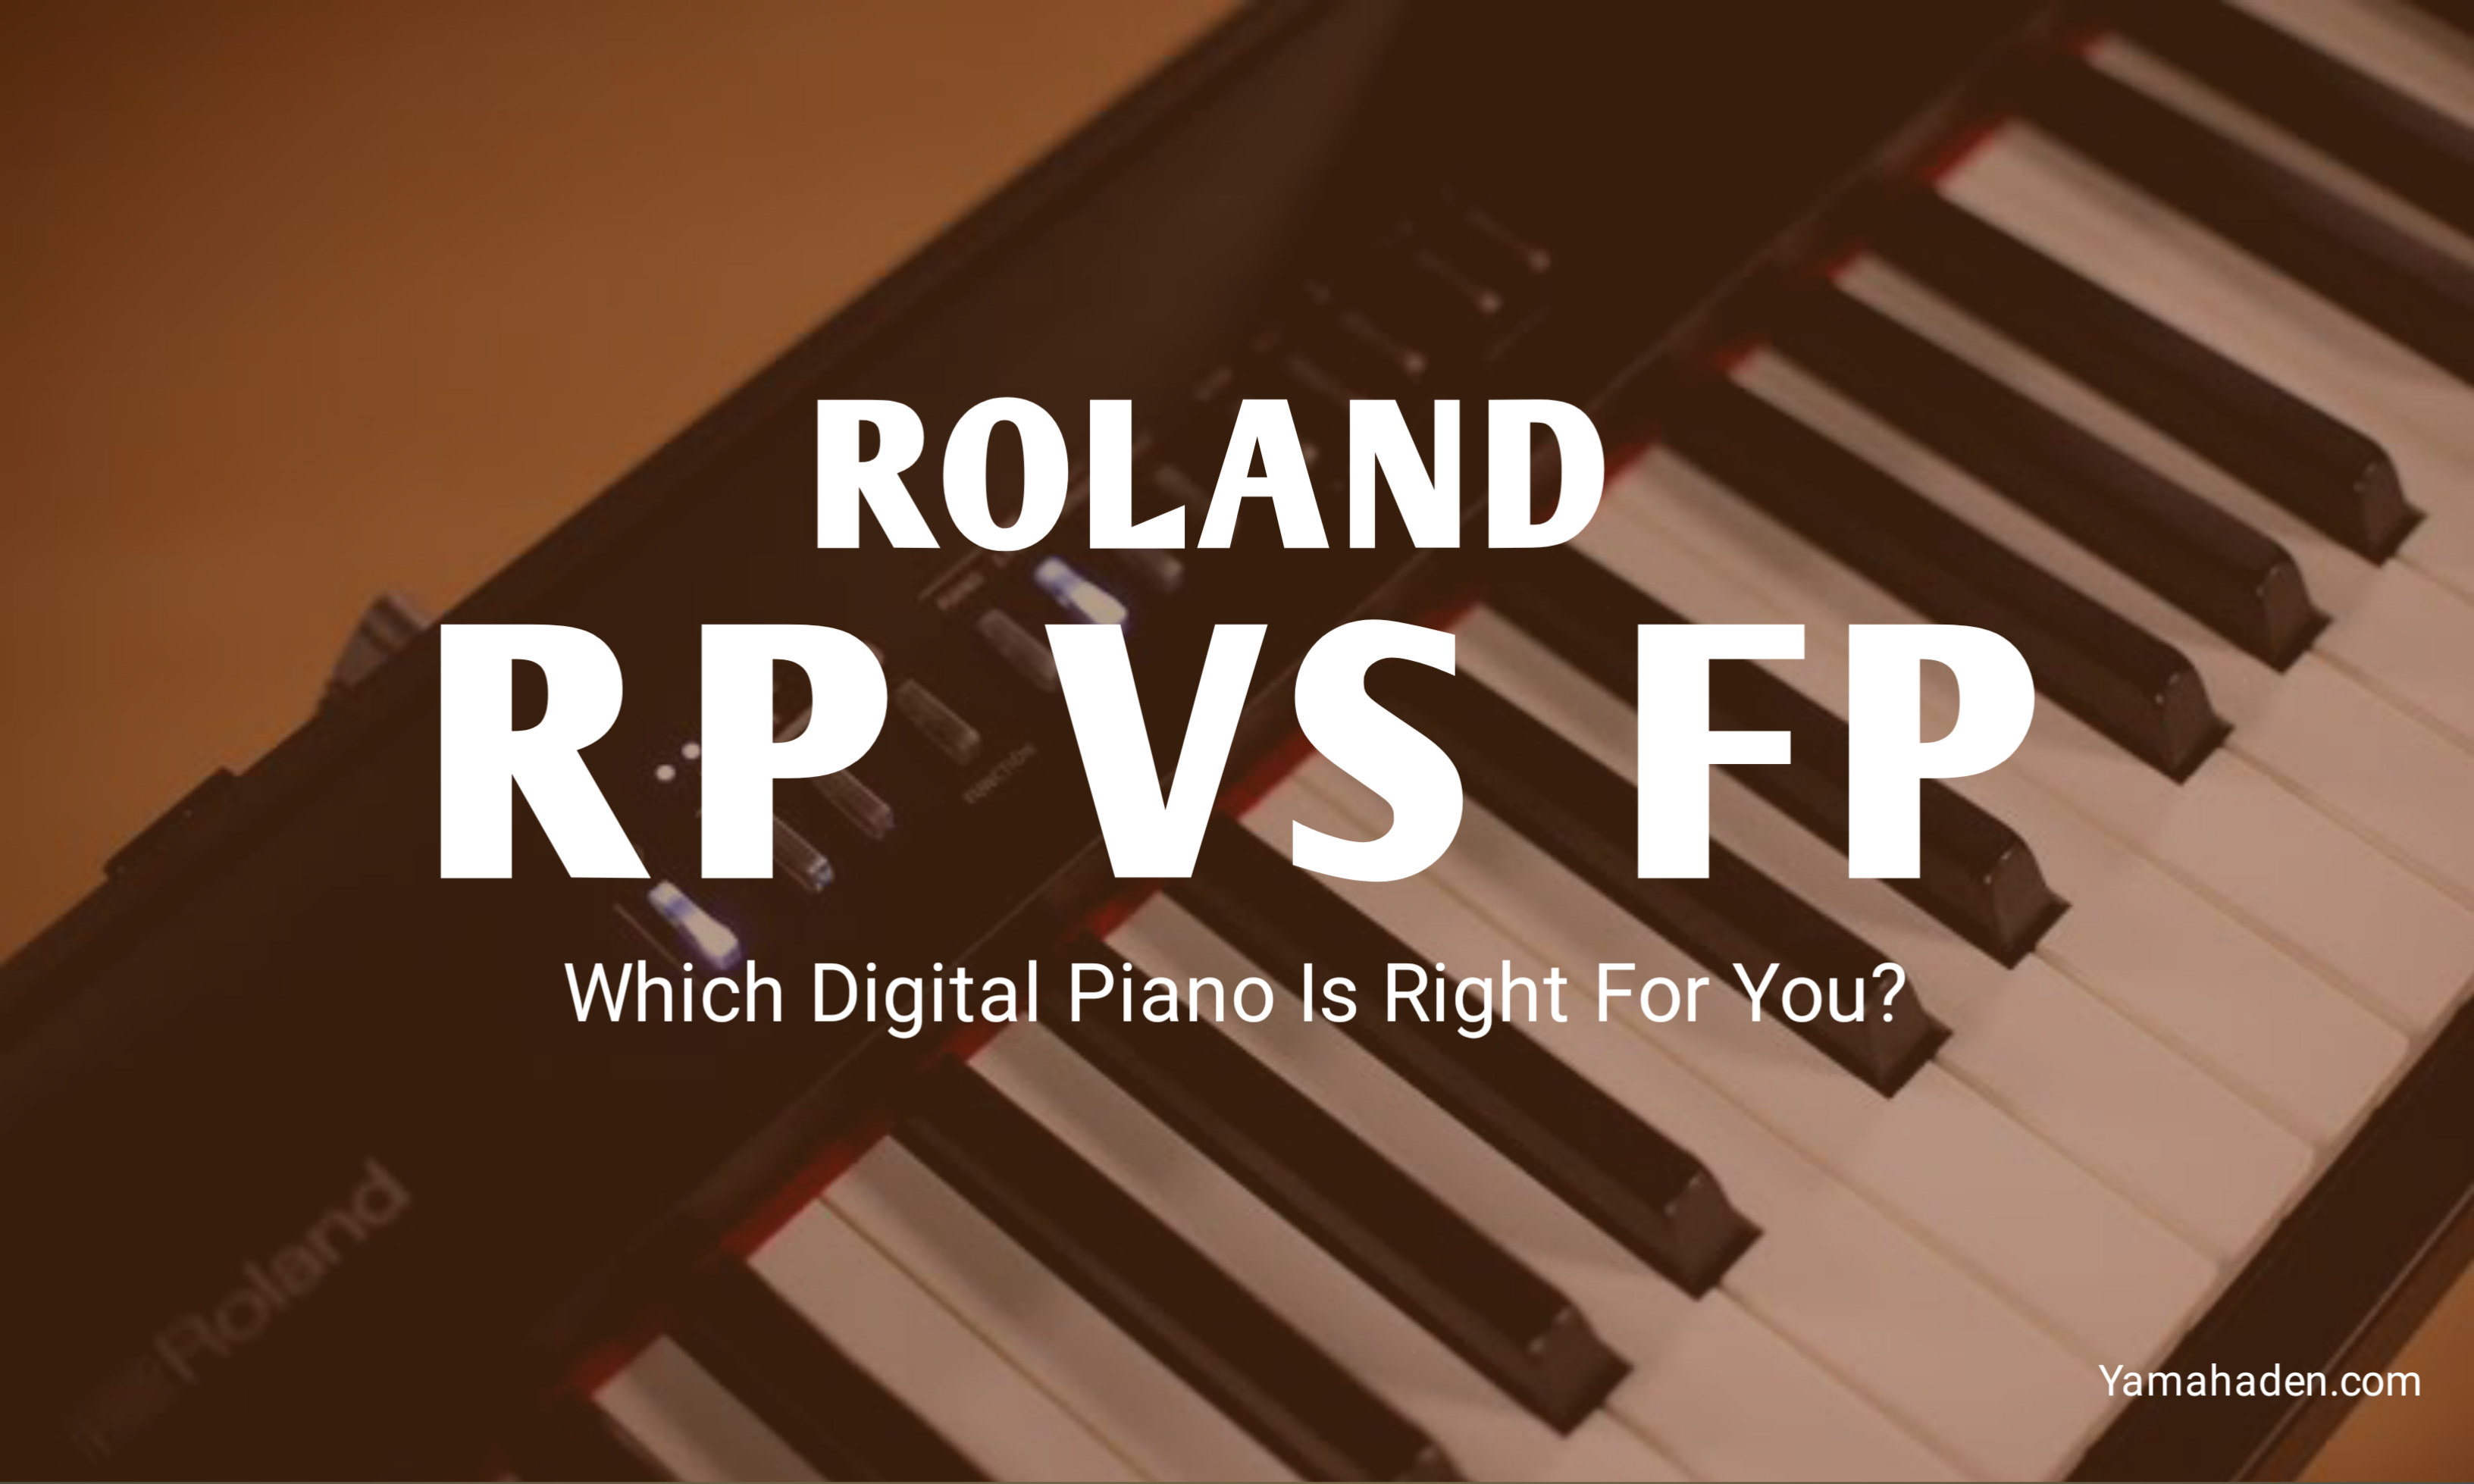 What is the difference between Roland RP and FP?